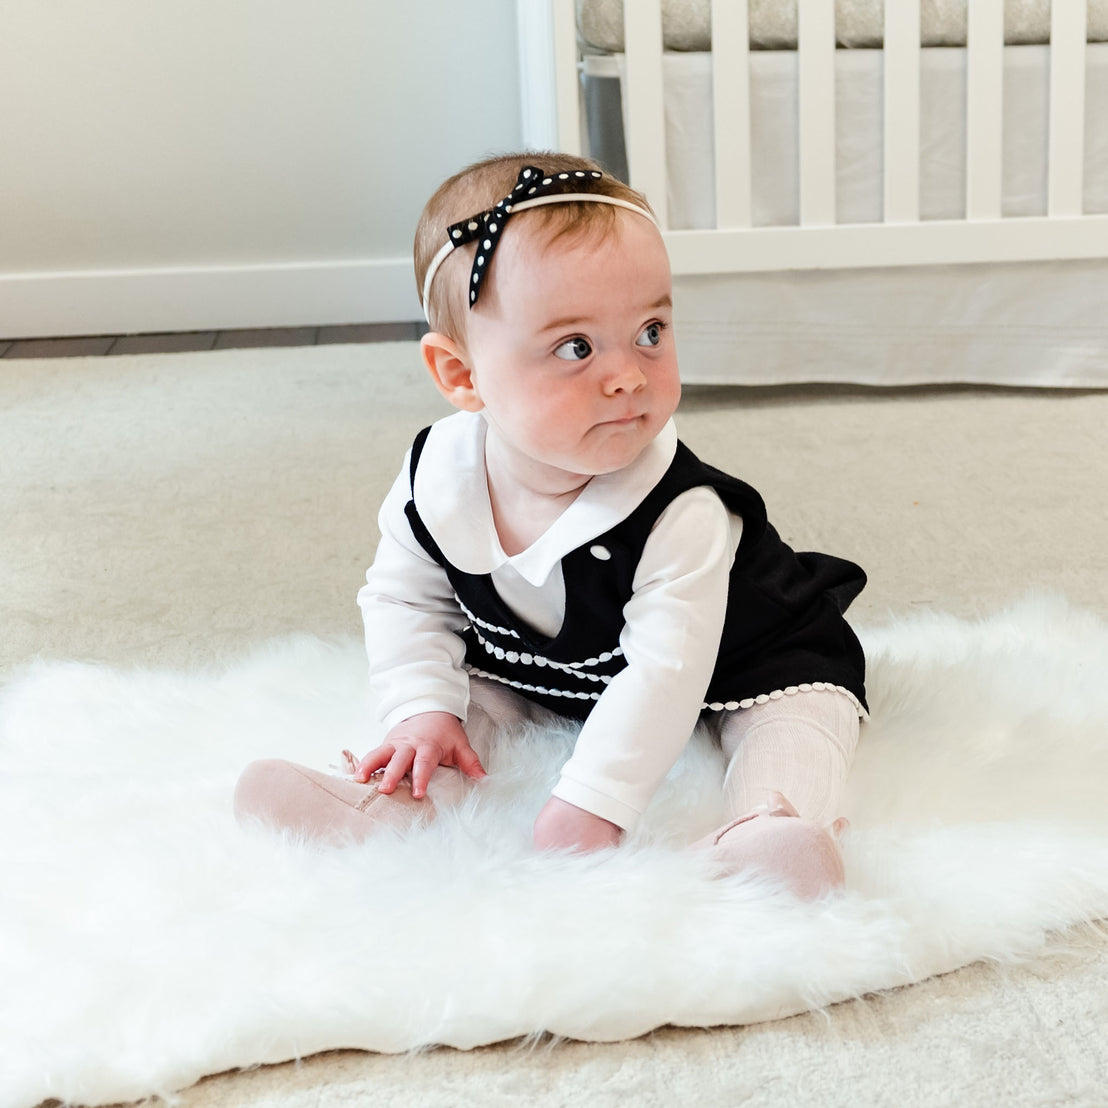 A baby girl sits on a plush rug, wearing a black and white dress with pink leggings and June Suede Tie Mary Janes, gazing thoughtfully to the side, with a crib partially visible.